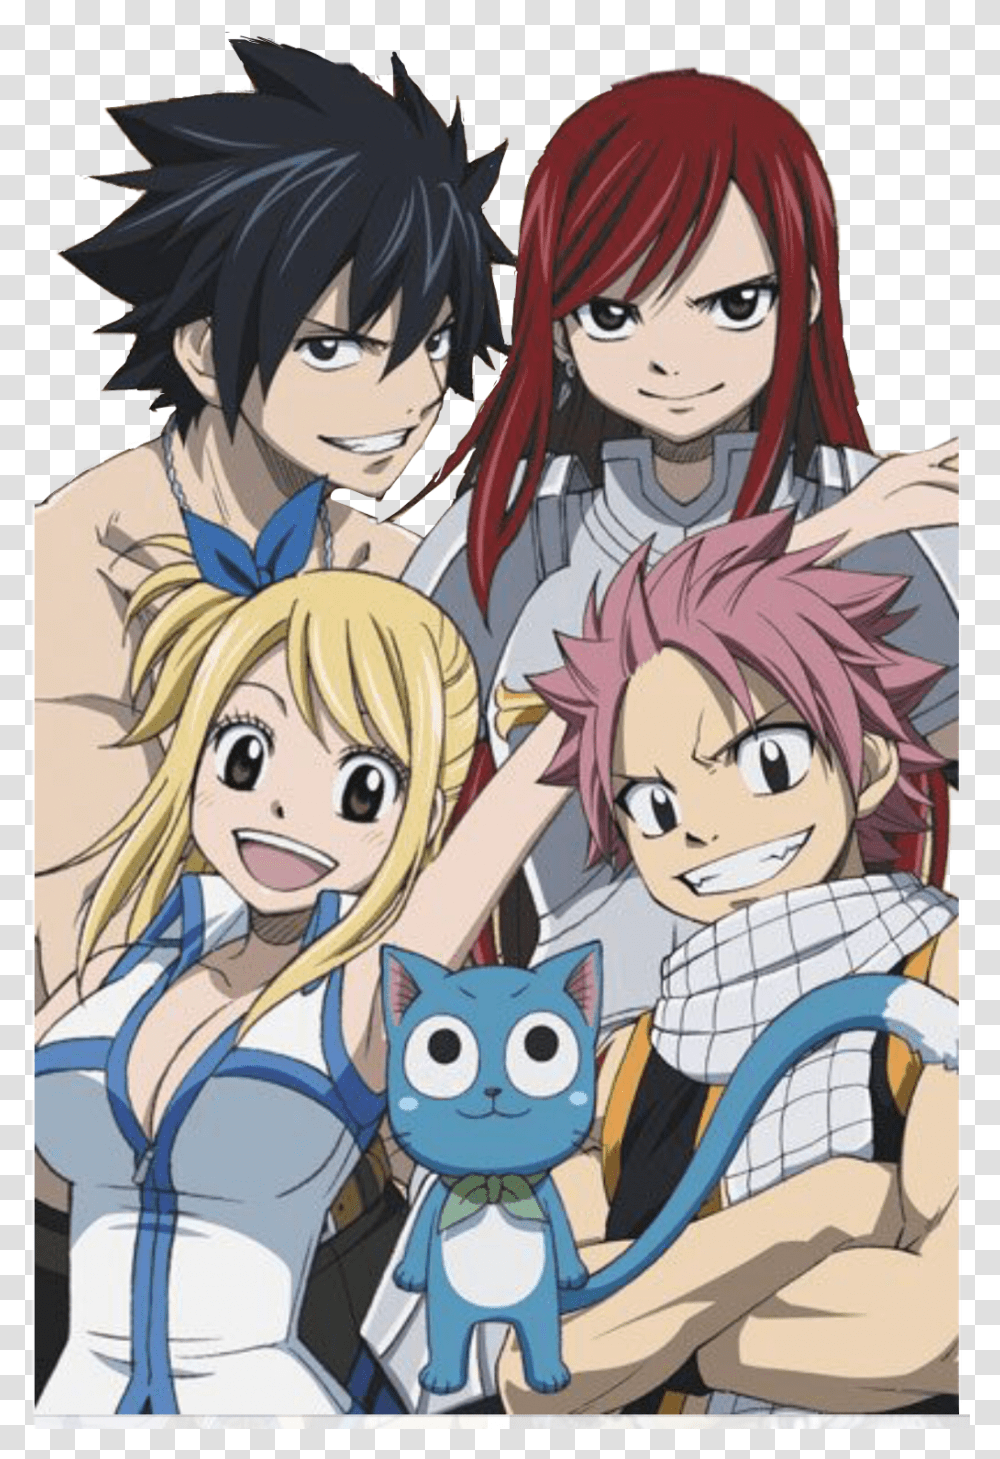 Fairytail Natsu Lucy Happy Gray Erza Freetoedit Fairy Tail Natsu Lucy, Manga, Comics, Book, Person Transparent Png